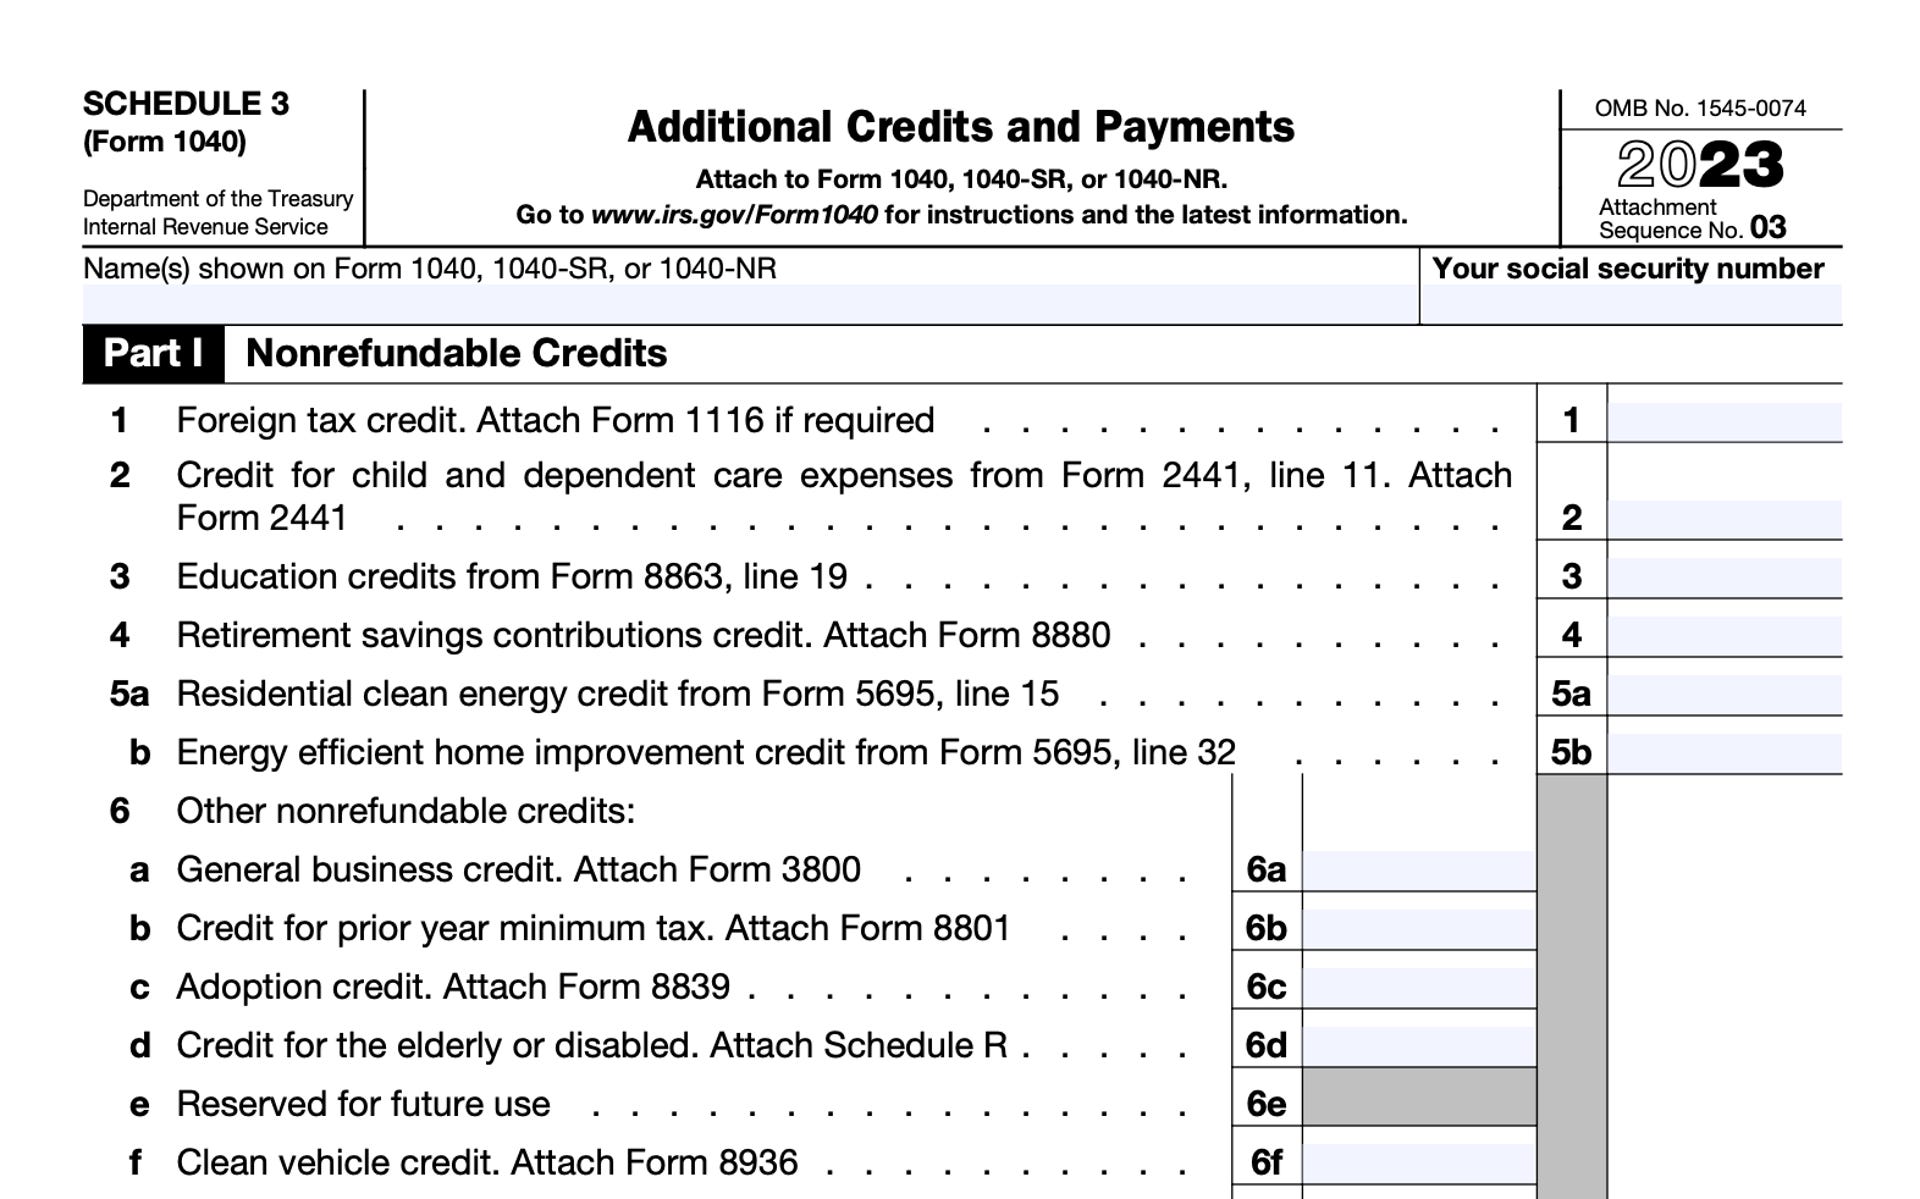 a screenshot of IRS Schedule 3 for 2023 showing a list of nonrefundable tax credits